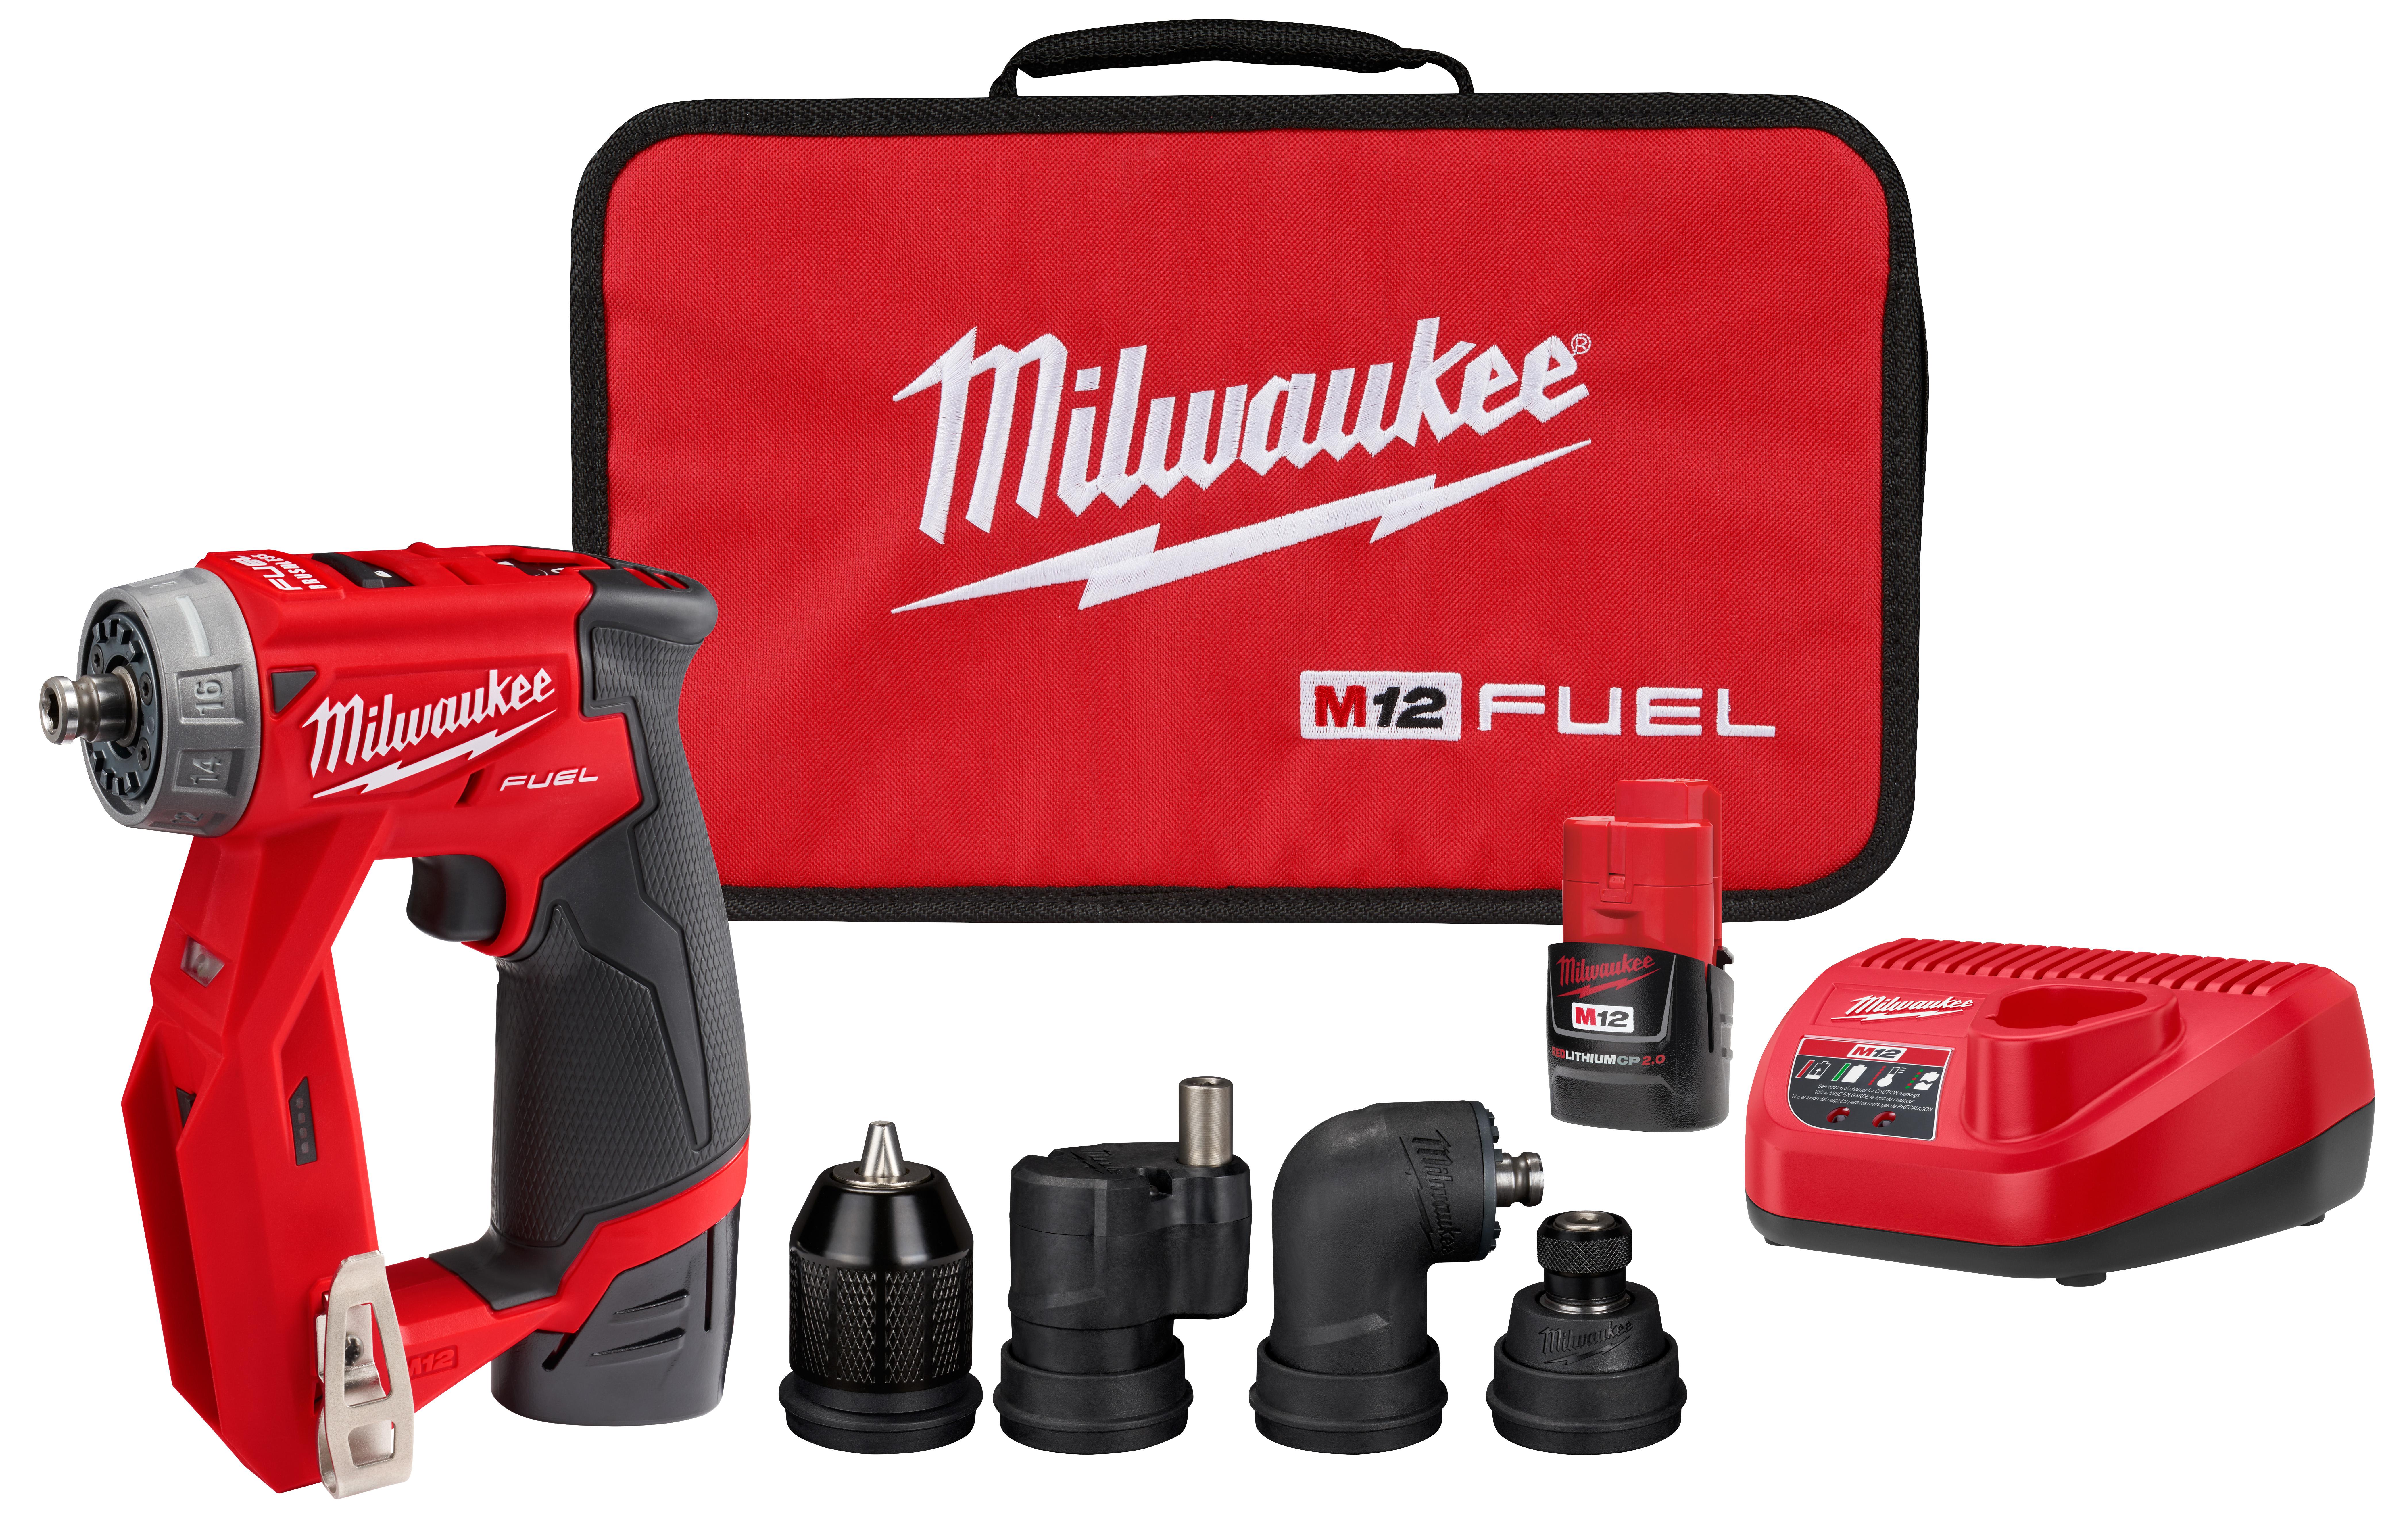 Milwaukee® M12 FUEL™ 2505-20 Cordless Installation Drill/Driver, 3/8 in Chuck, 12 V, 1600 rpm No-Load, 5.12 in OAL, M12™ REDLITHIUM™ CP2.0 Lithium-Ion Battery